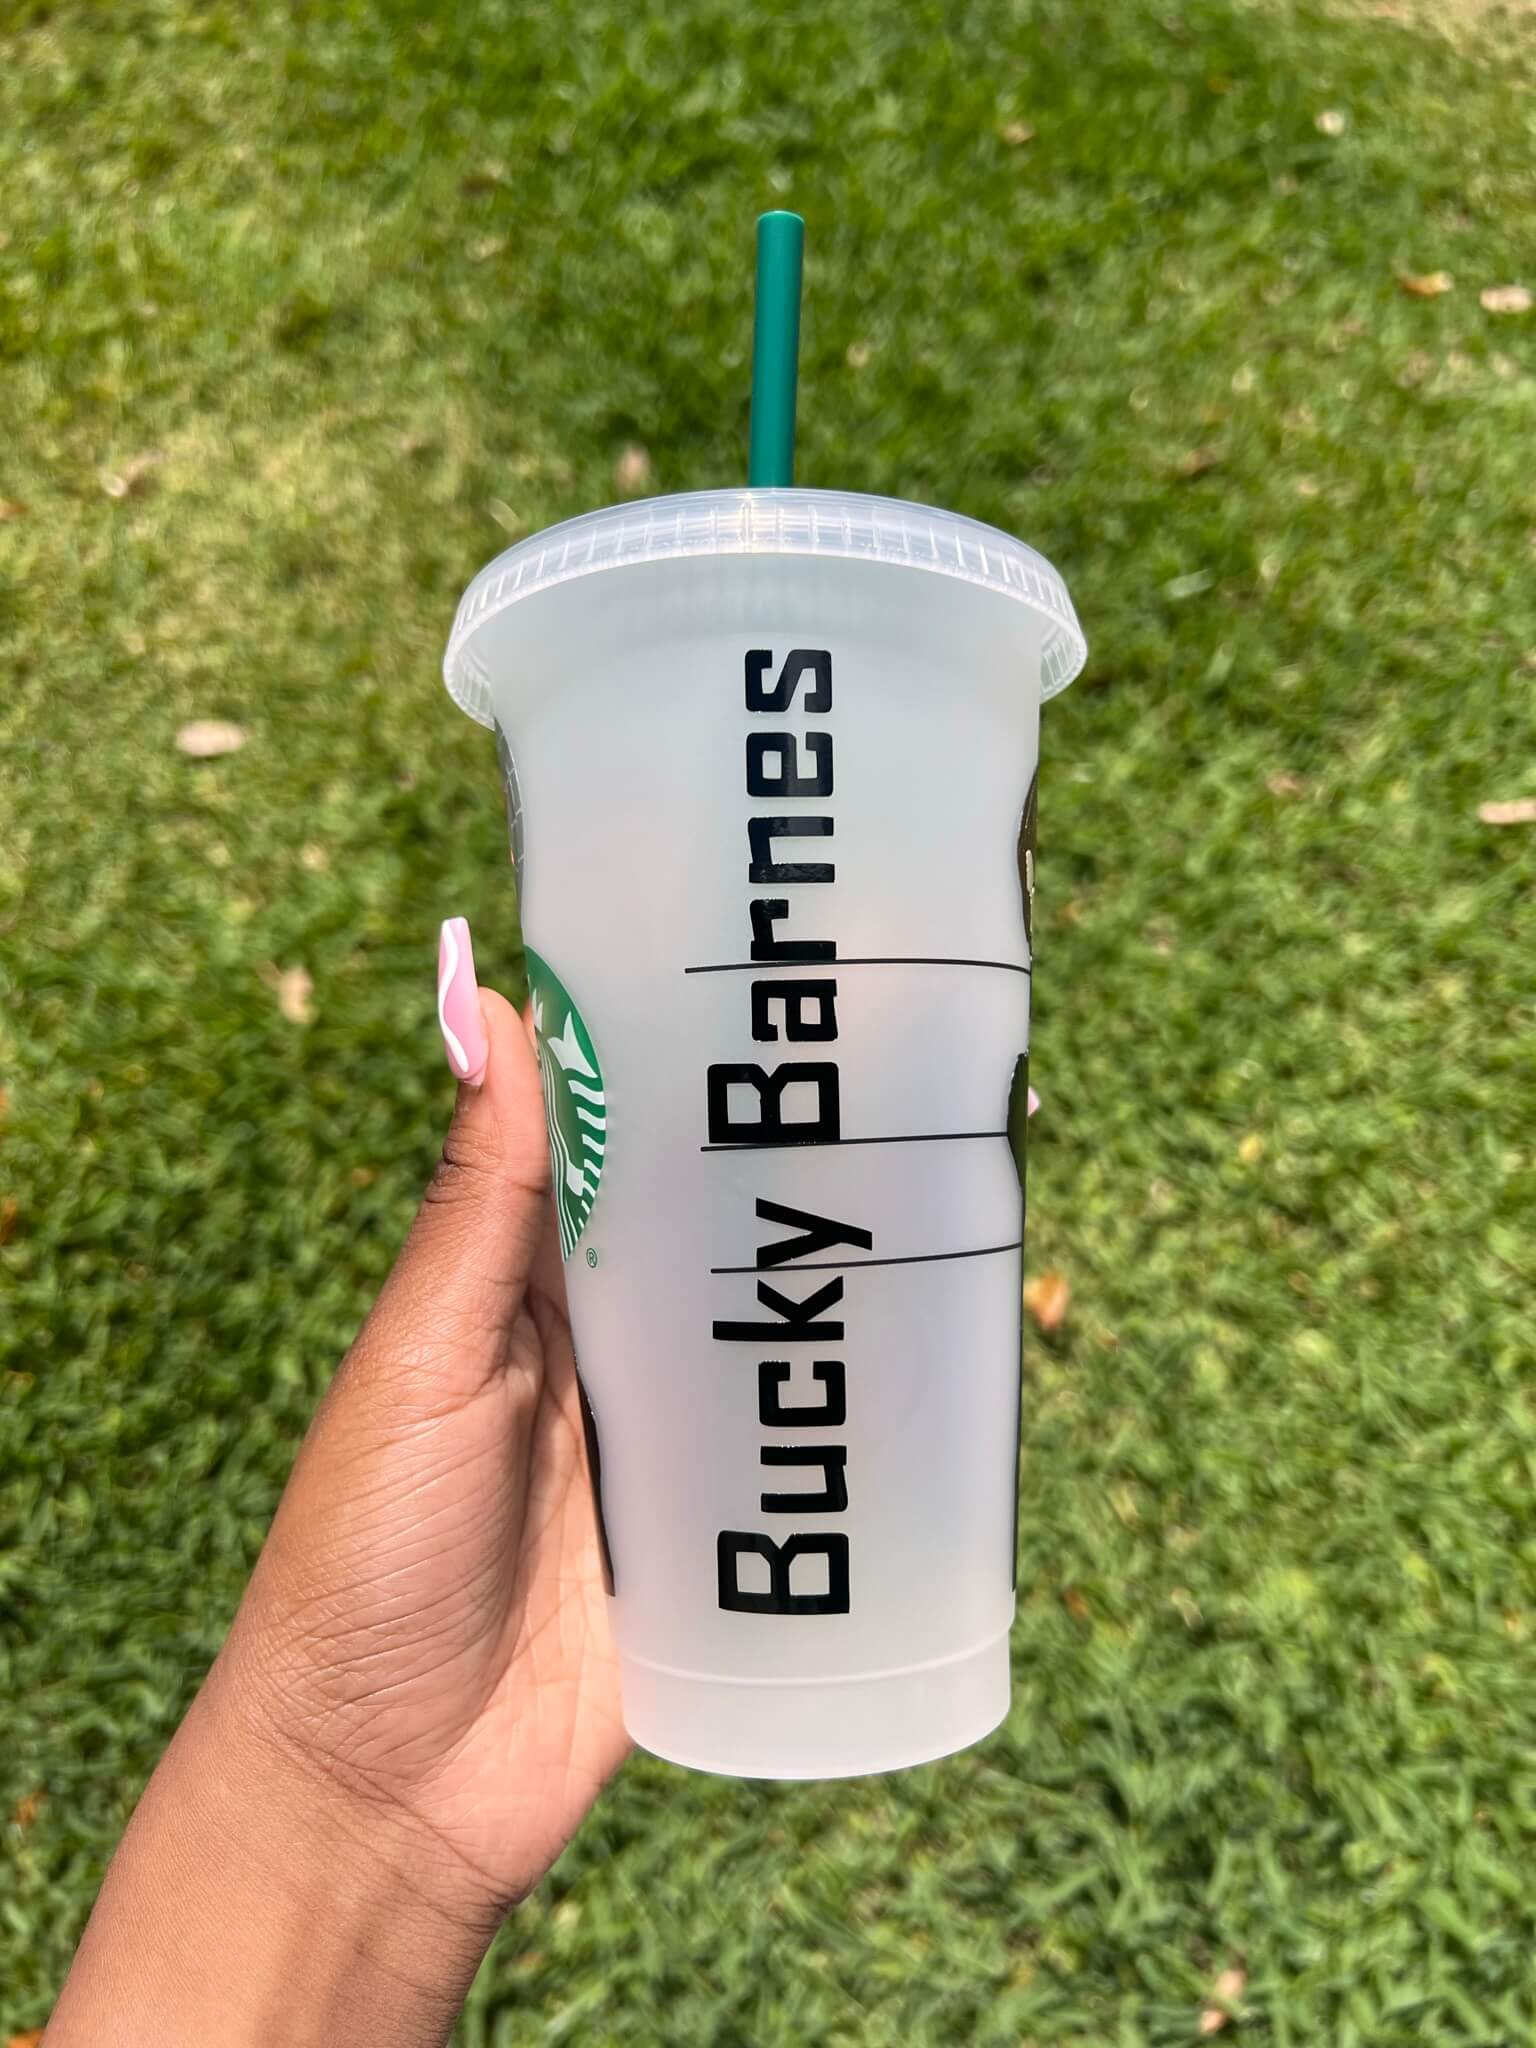 Bucky Barnes Winter Soldier Inspired Starbucks Cup - HPK Personalized Products and more